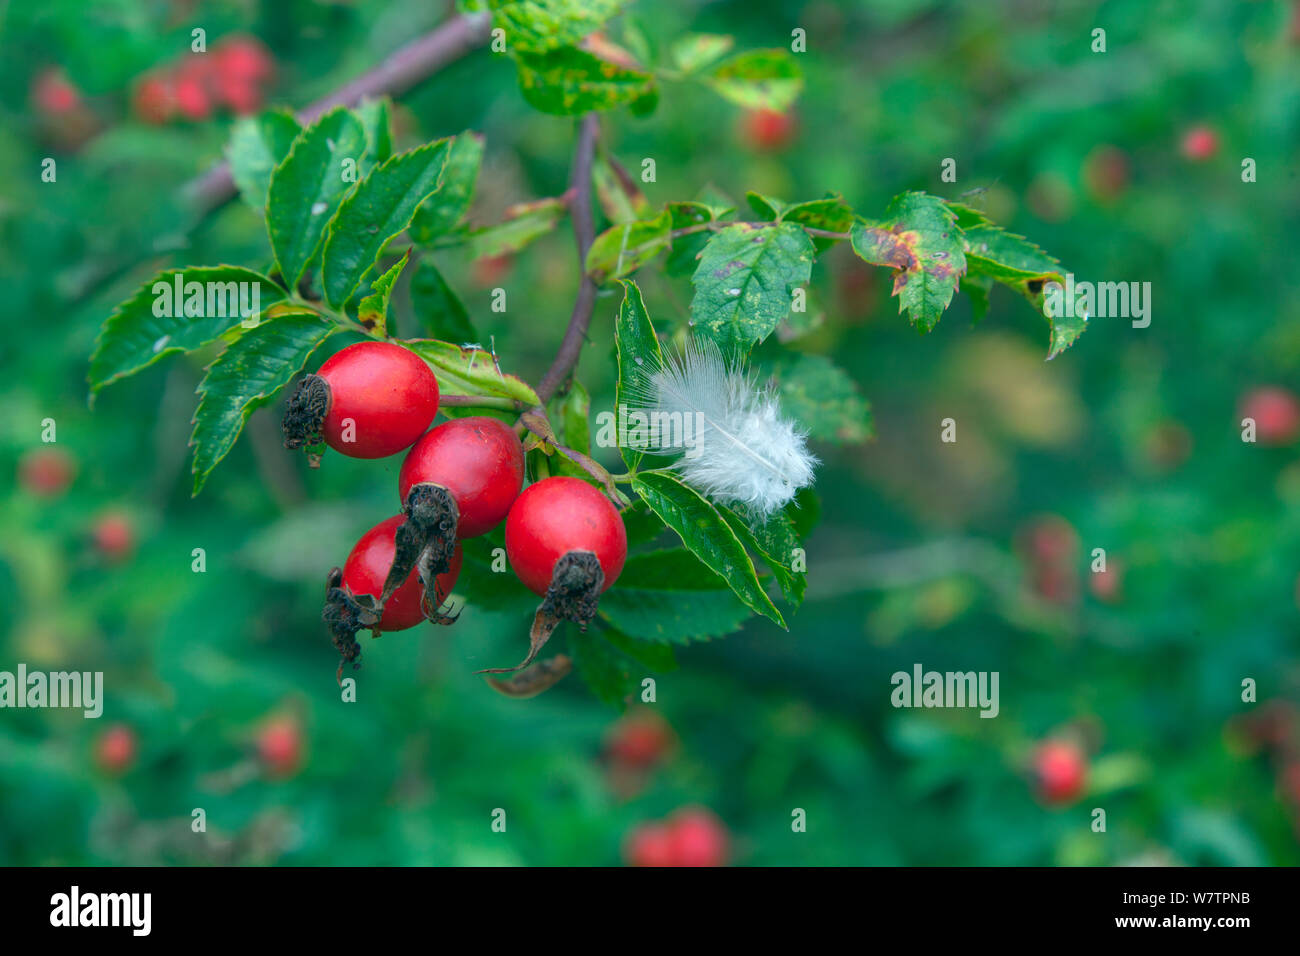 Dog rose (Rosa canina) hips and feather in hedgerow, East Anglia, UK, September. Stock Photo